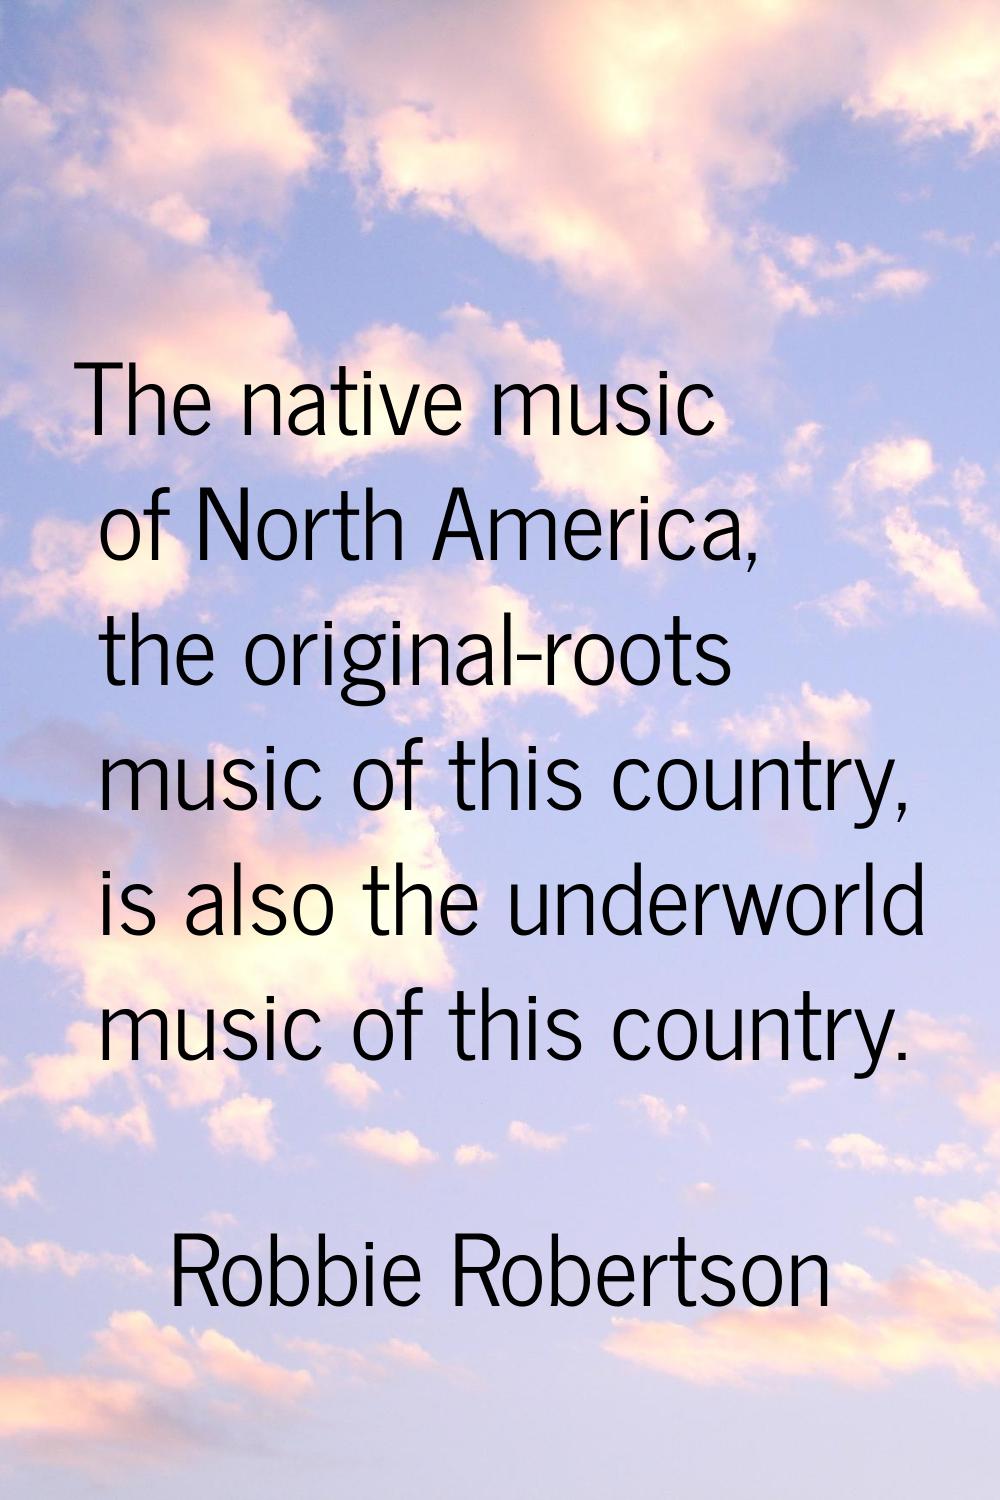 The native music of North America, the original-roots music of this country, is also the underworld